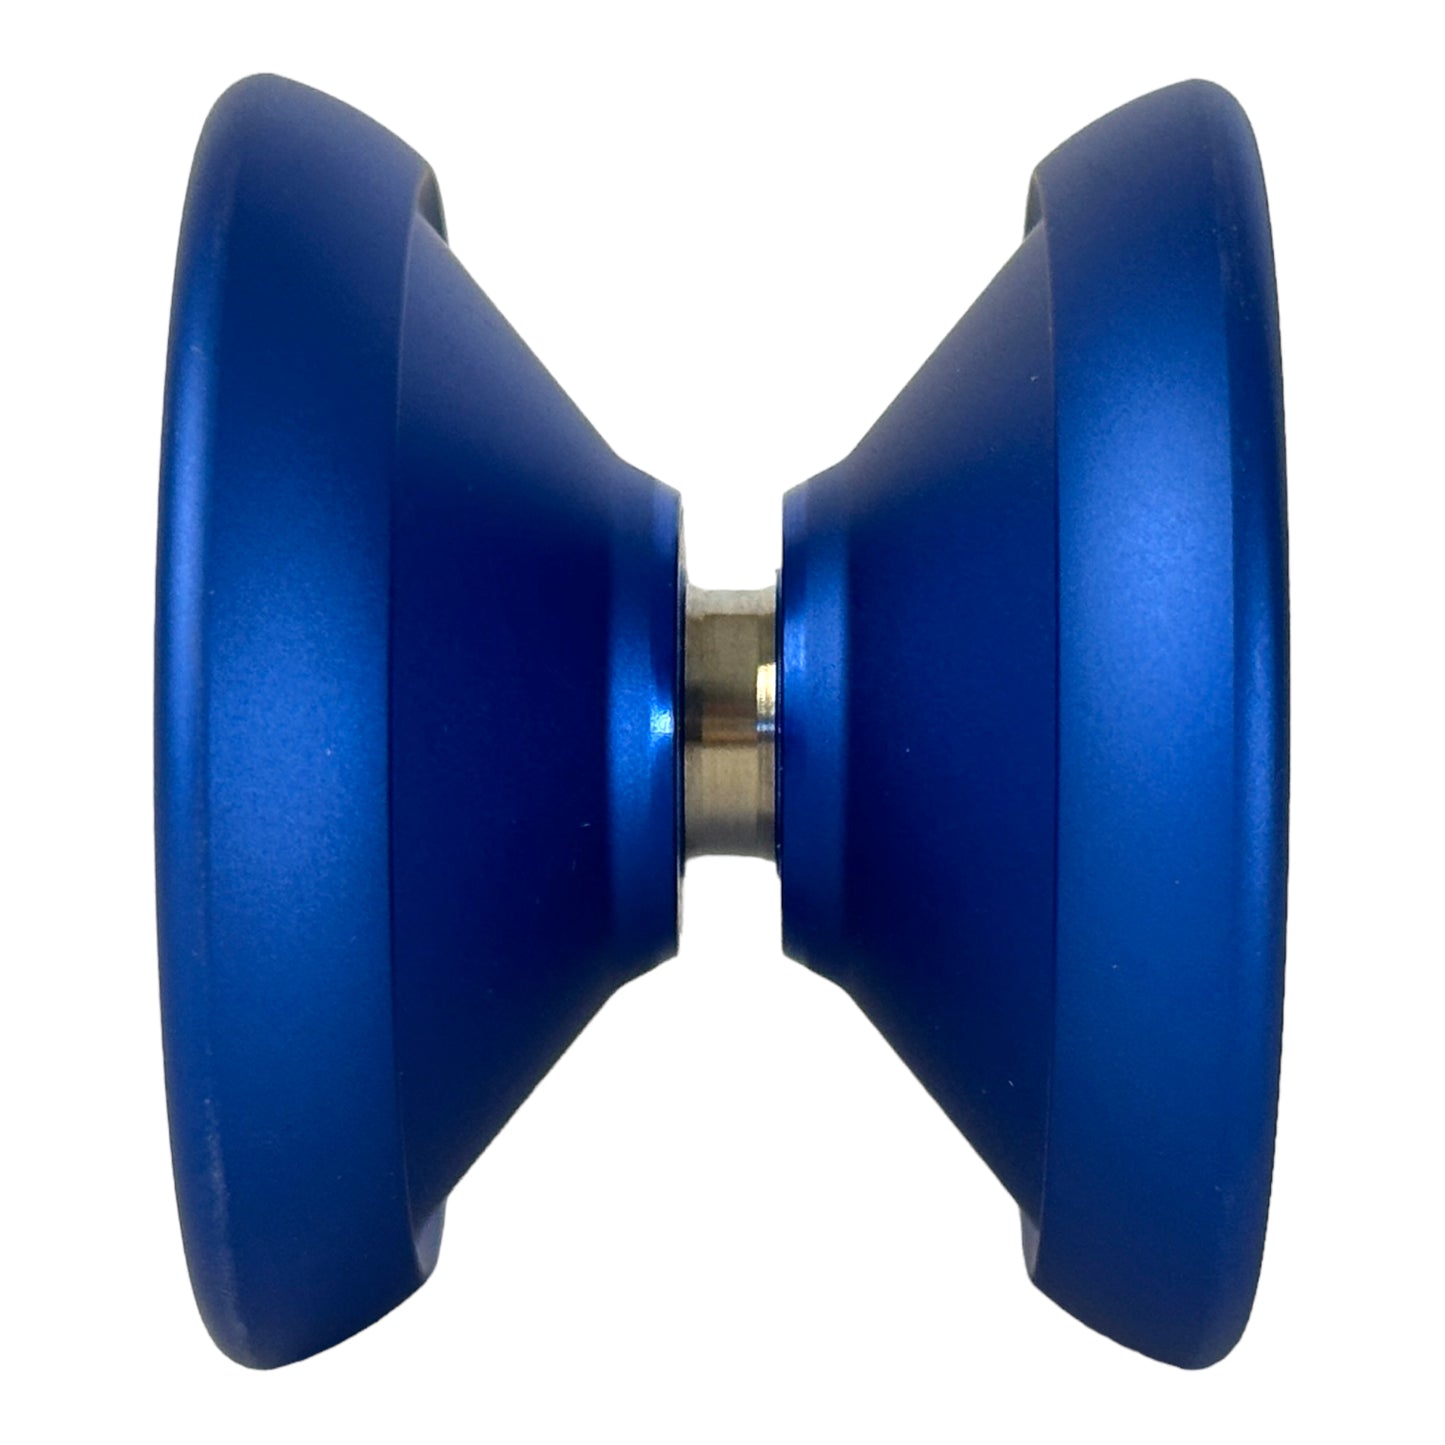 Superstar YoYo blue with yellow cap center view